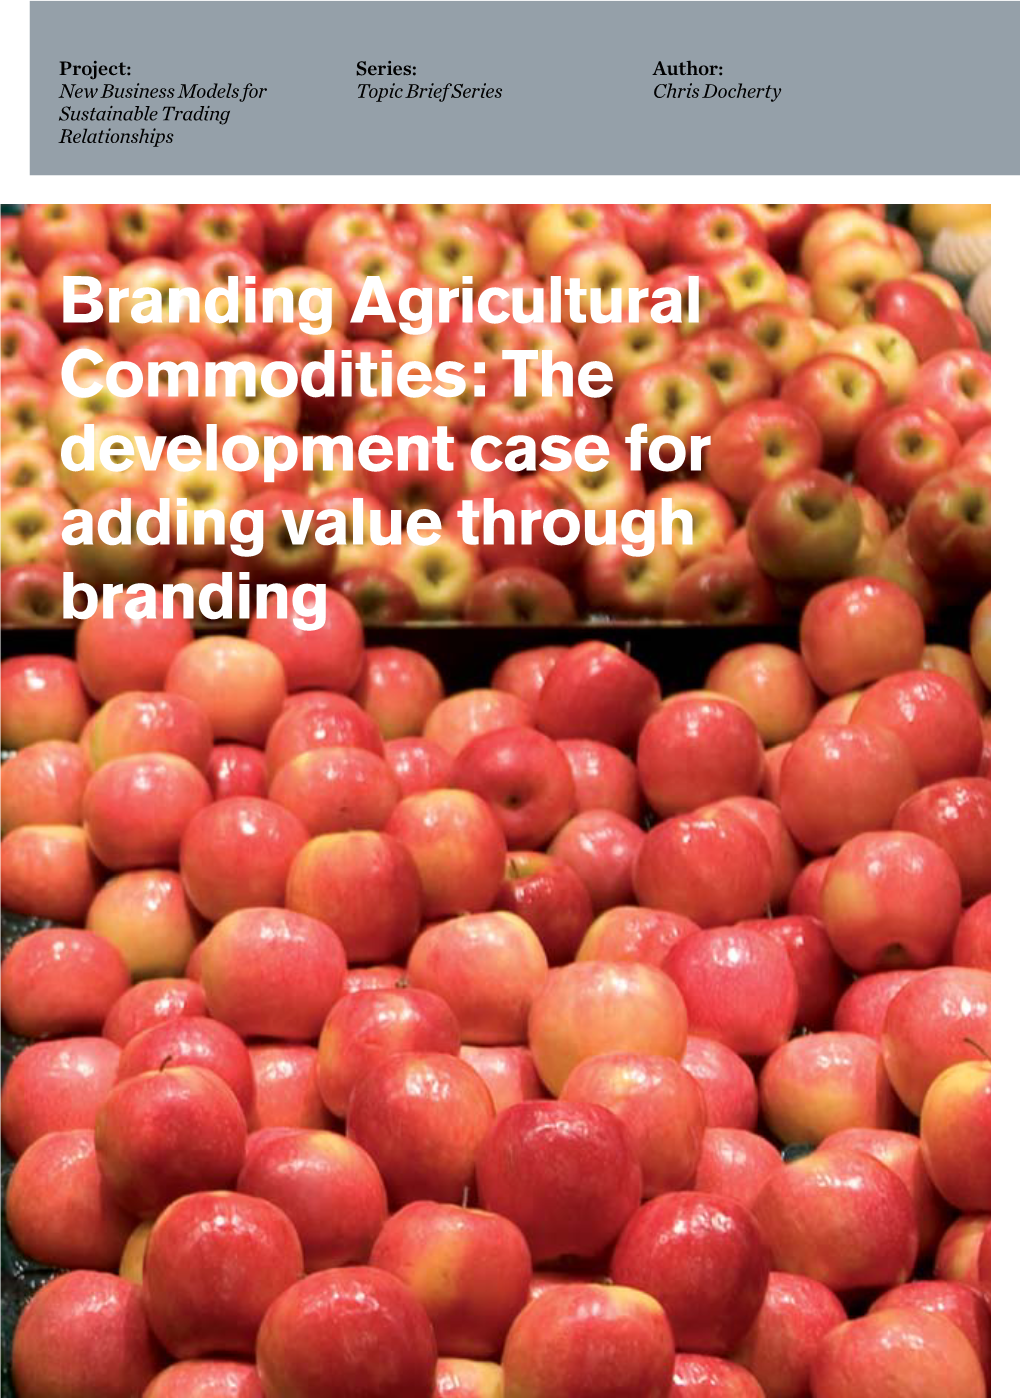 Branding Agricultural Commodities: the Development Case for Adding Value Through Branding